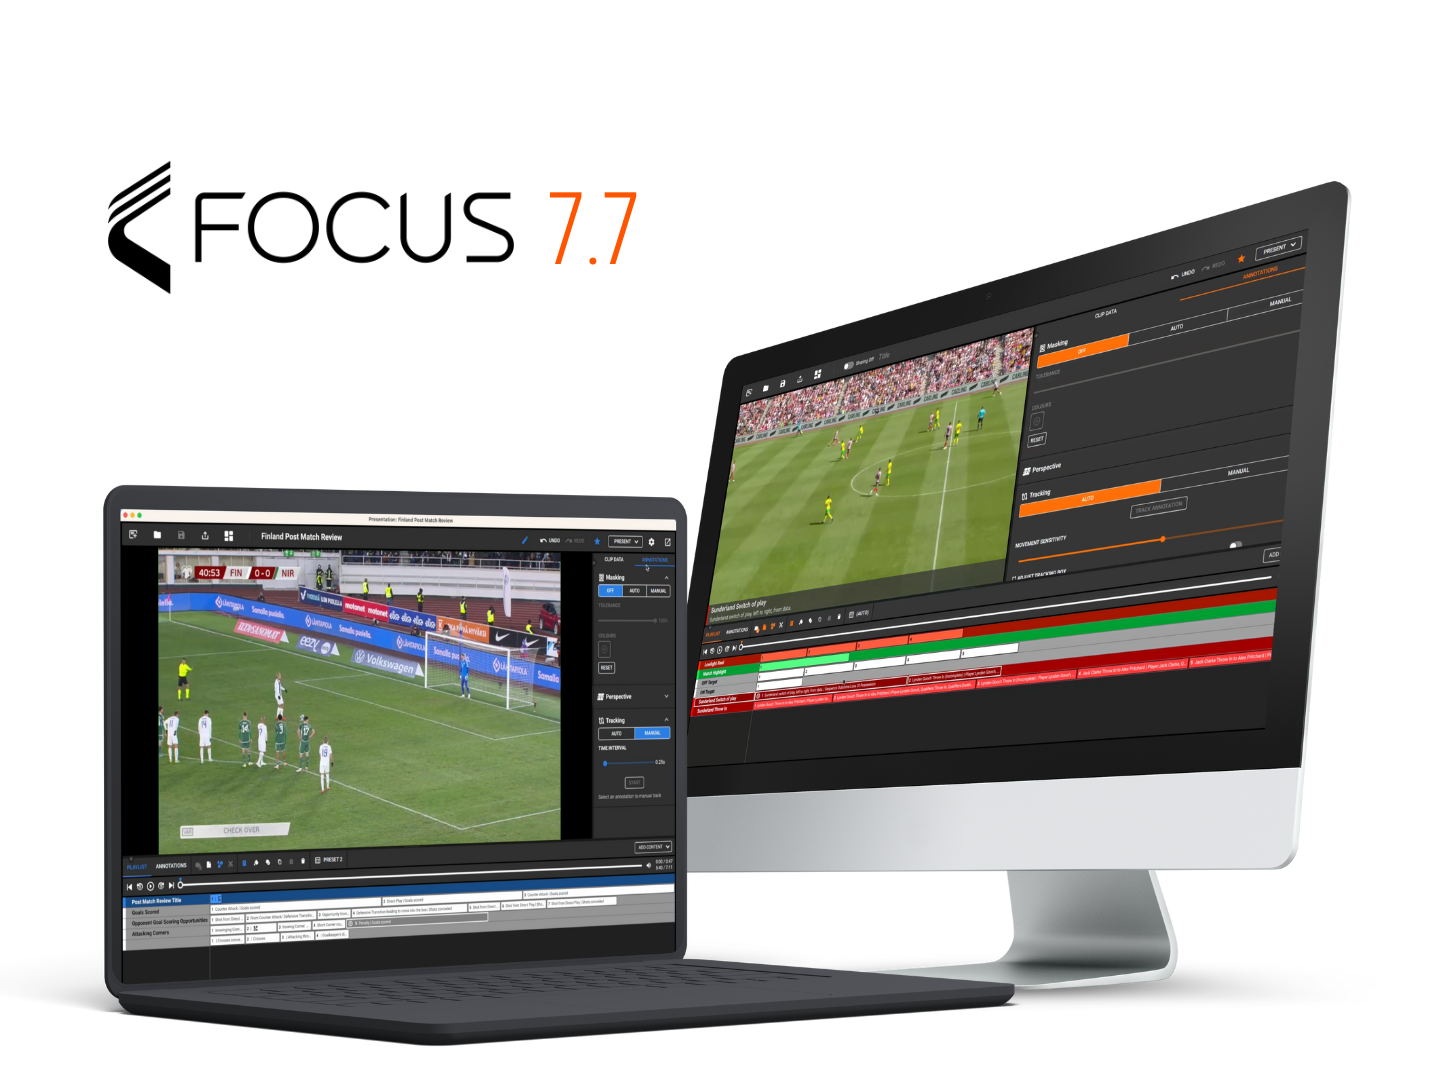 Various devices including a laptop, desktop, and smartphone displaying soccer analysis interfaces from the Focus 7.7 platform. The devices are arranged in a circular pattern with an orange background.